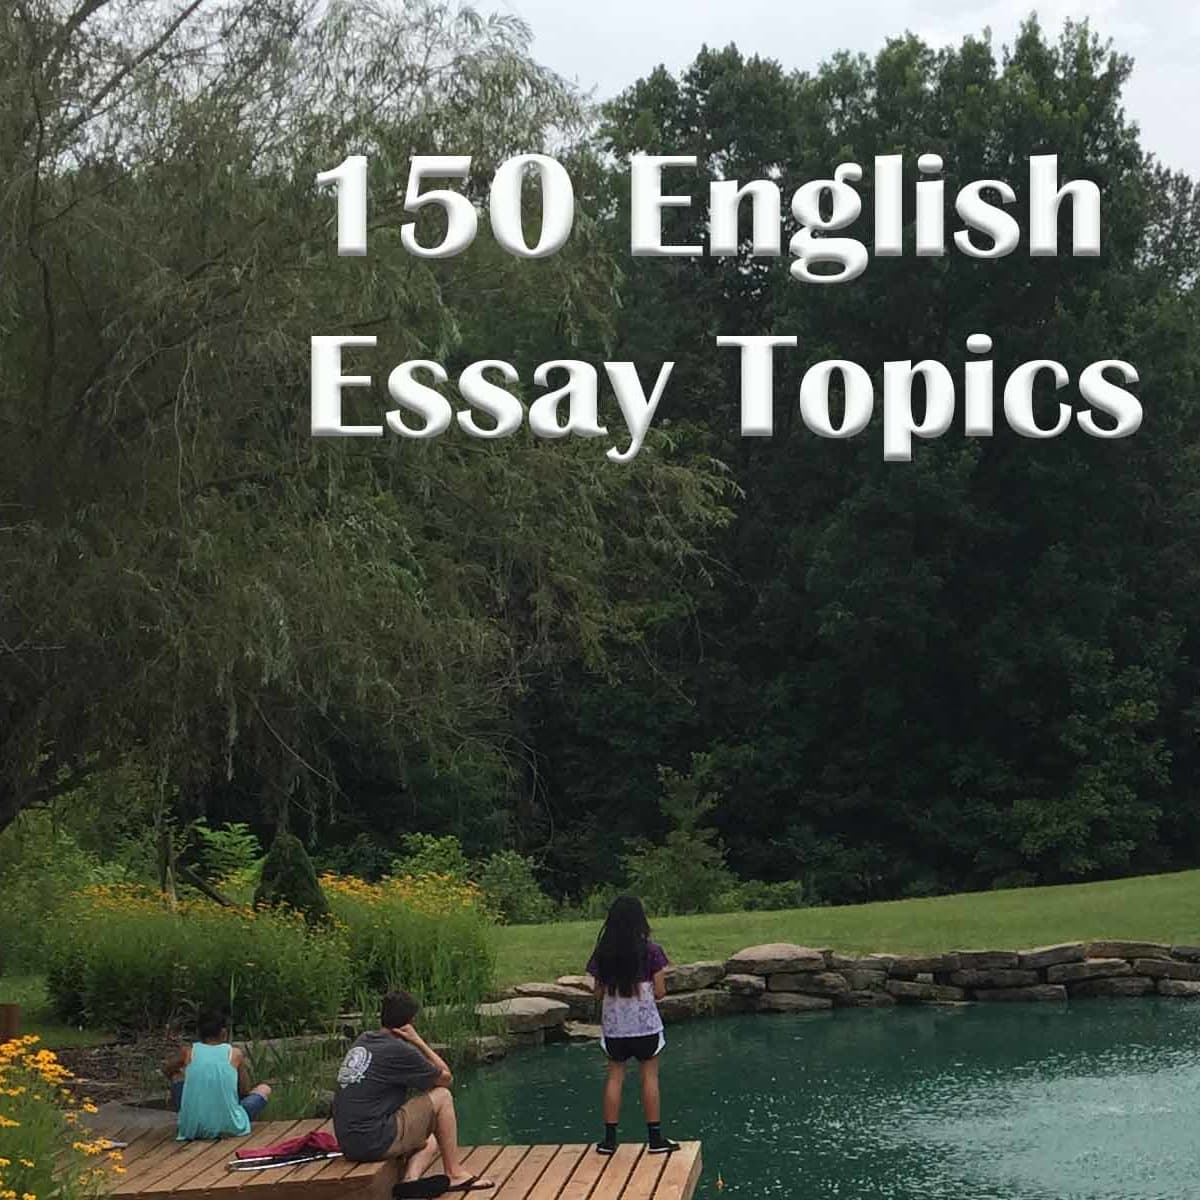 common topics for essay writing competition